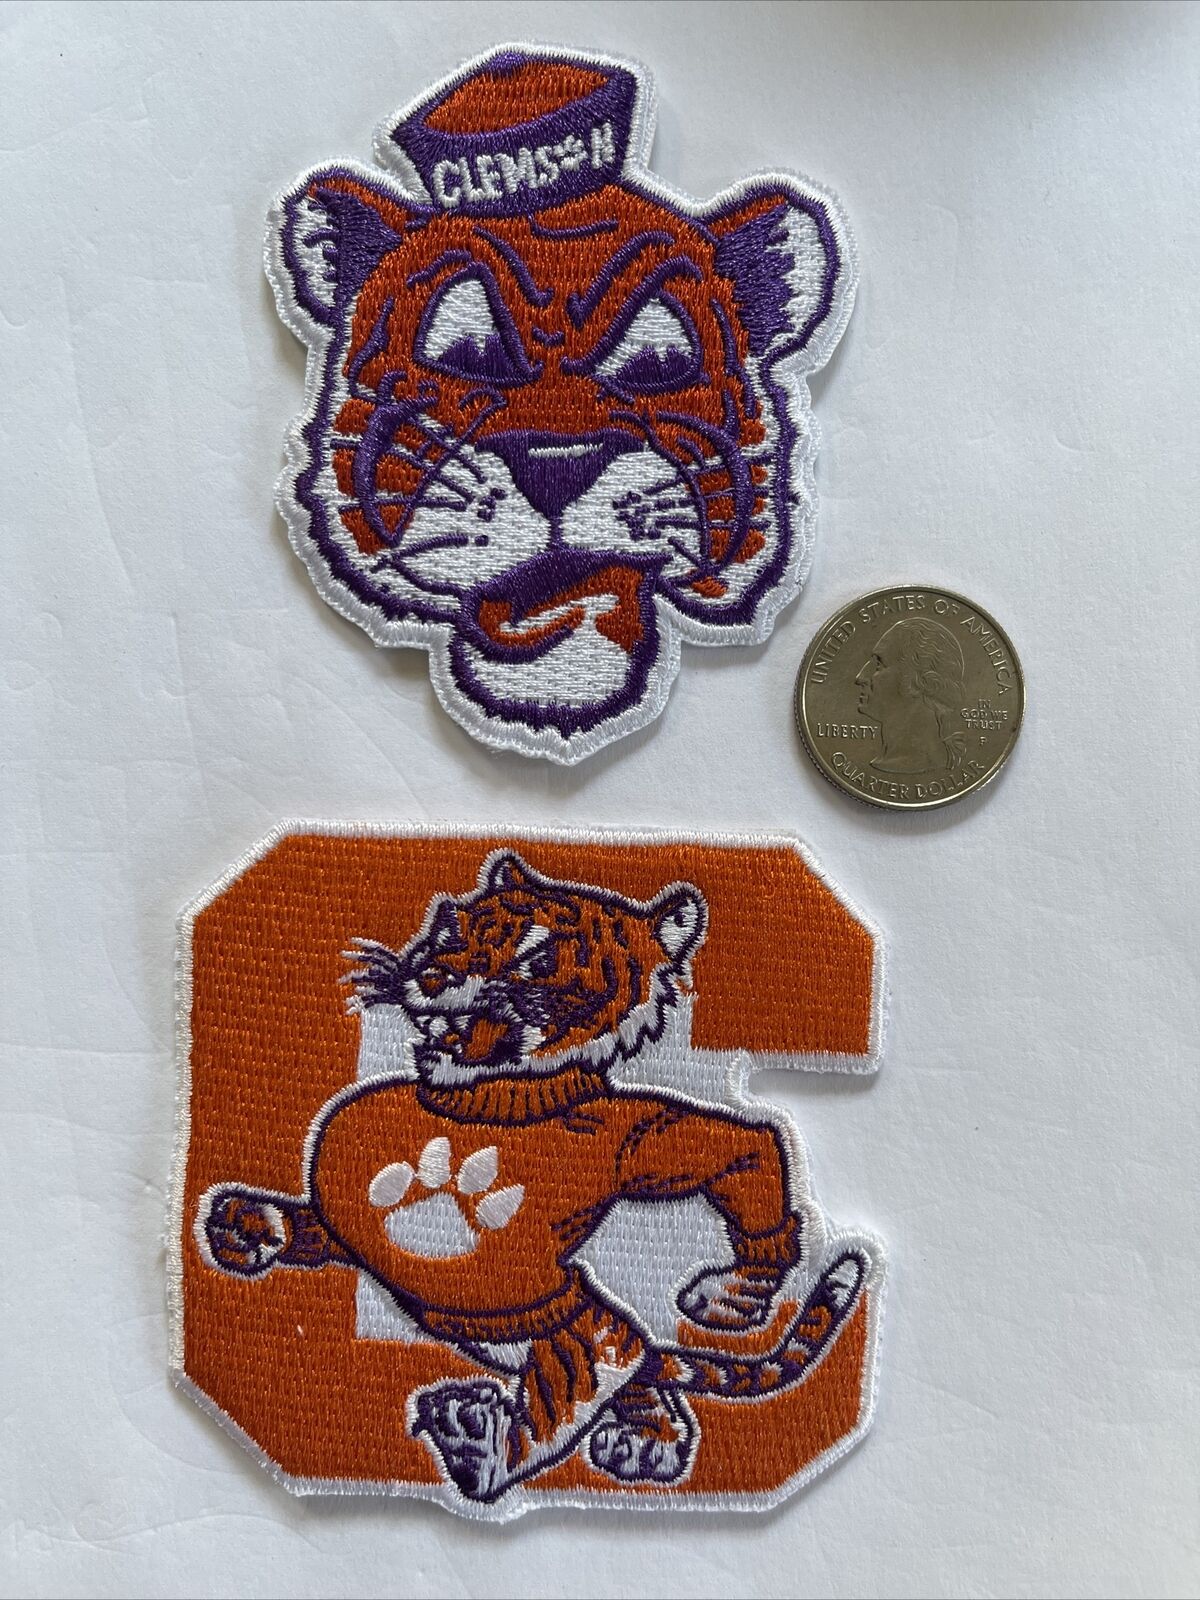 2 CLEMSON U - Clemson Tigers Vintage Embroidered Iron On Patches Patch Lot 3”